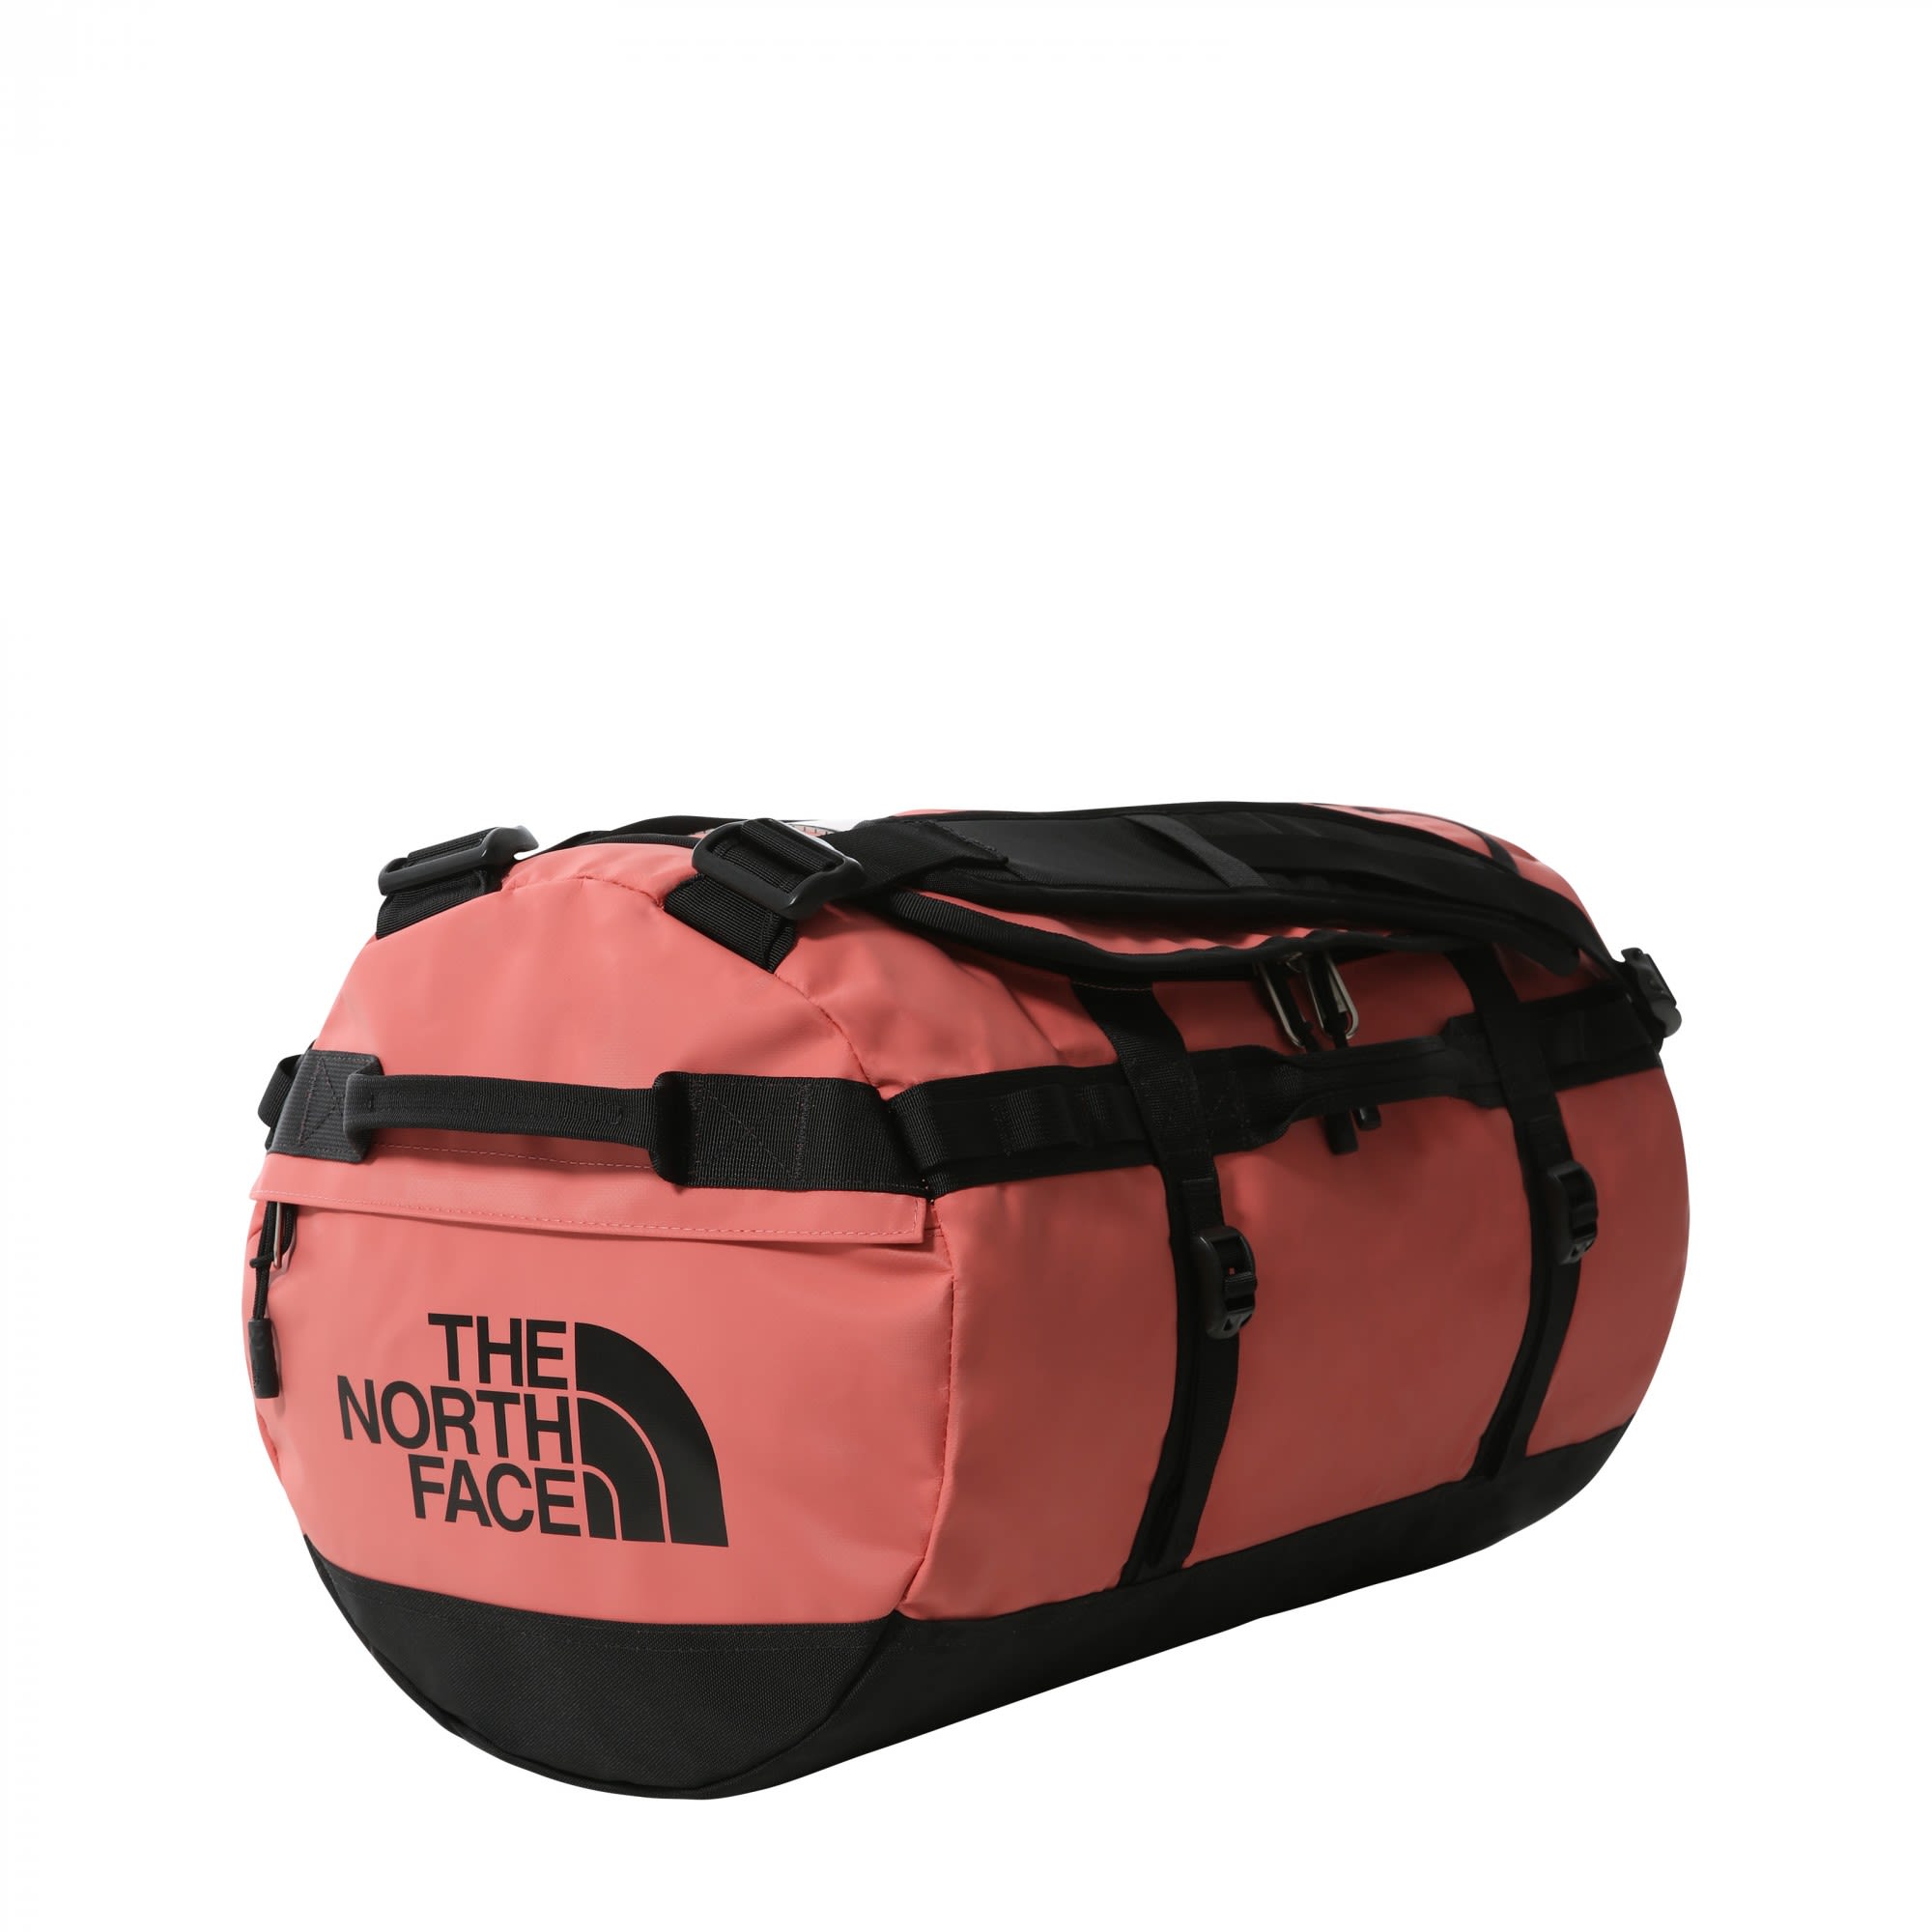 The North Face Robuste vielseitige Reisetasche  71l Faded Rose - TNF Black